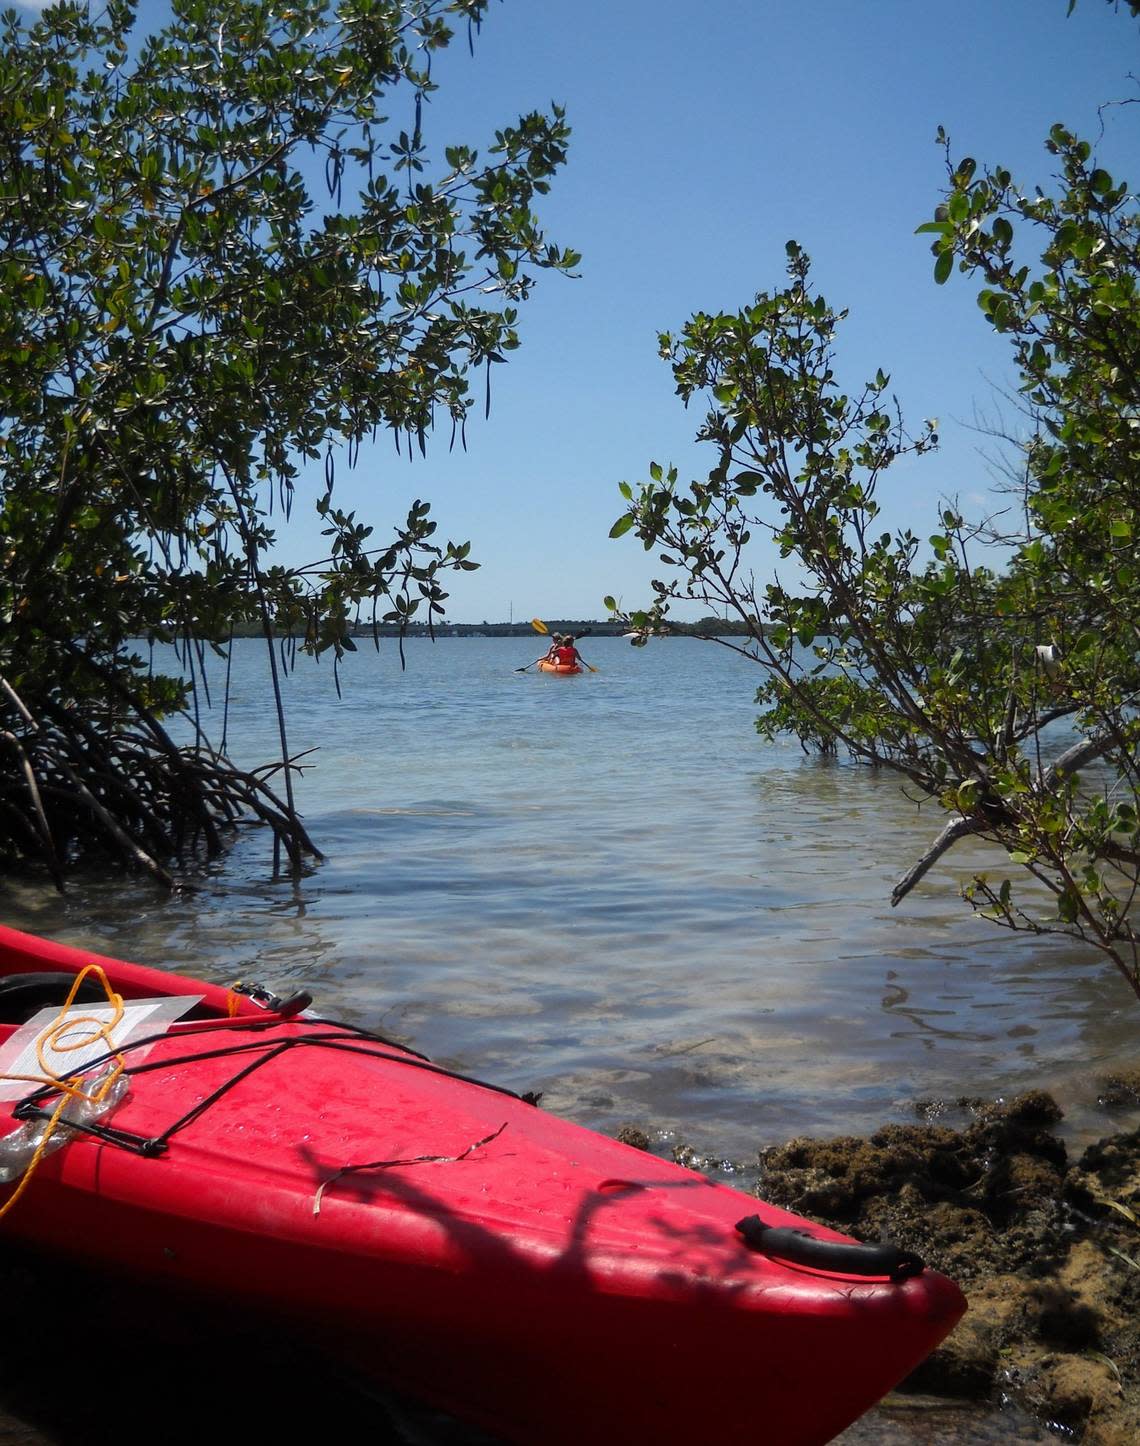 Indian Key, a state park accessible only by boat, is an easy half-hour paddle over shallow water, off the Overseas Highway in Islamorada. Bonnie Gross / FloridaRambler.com